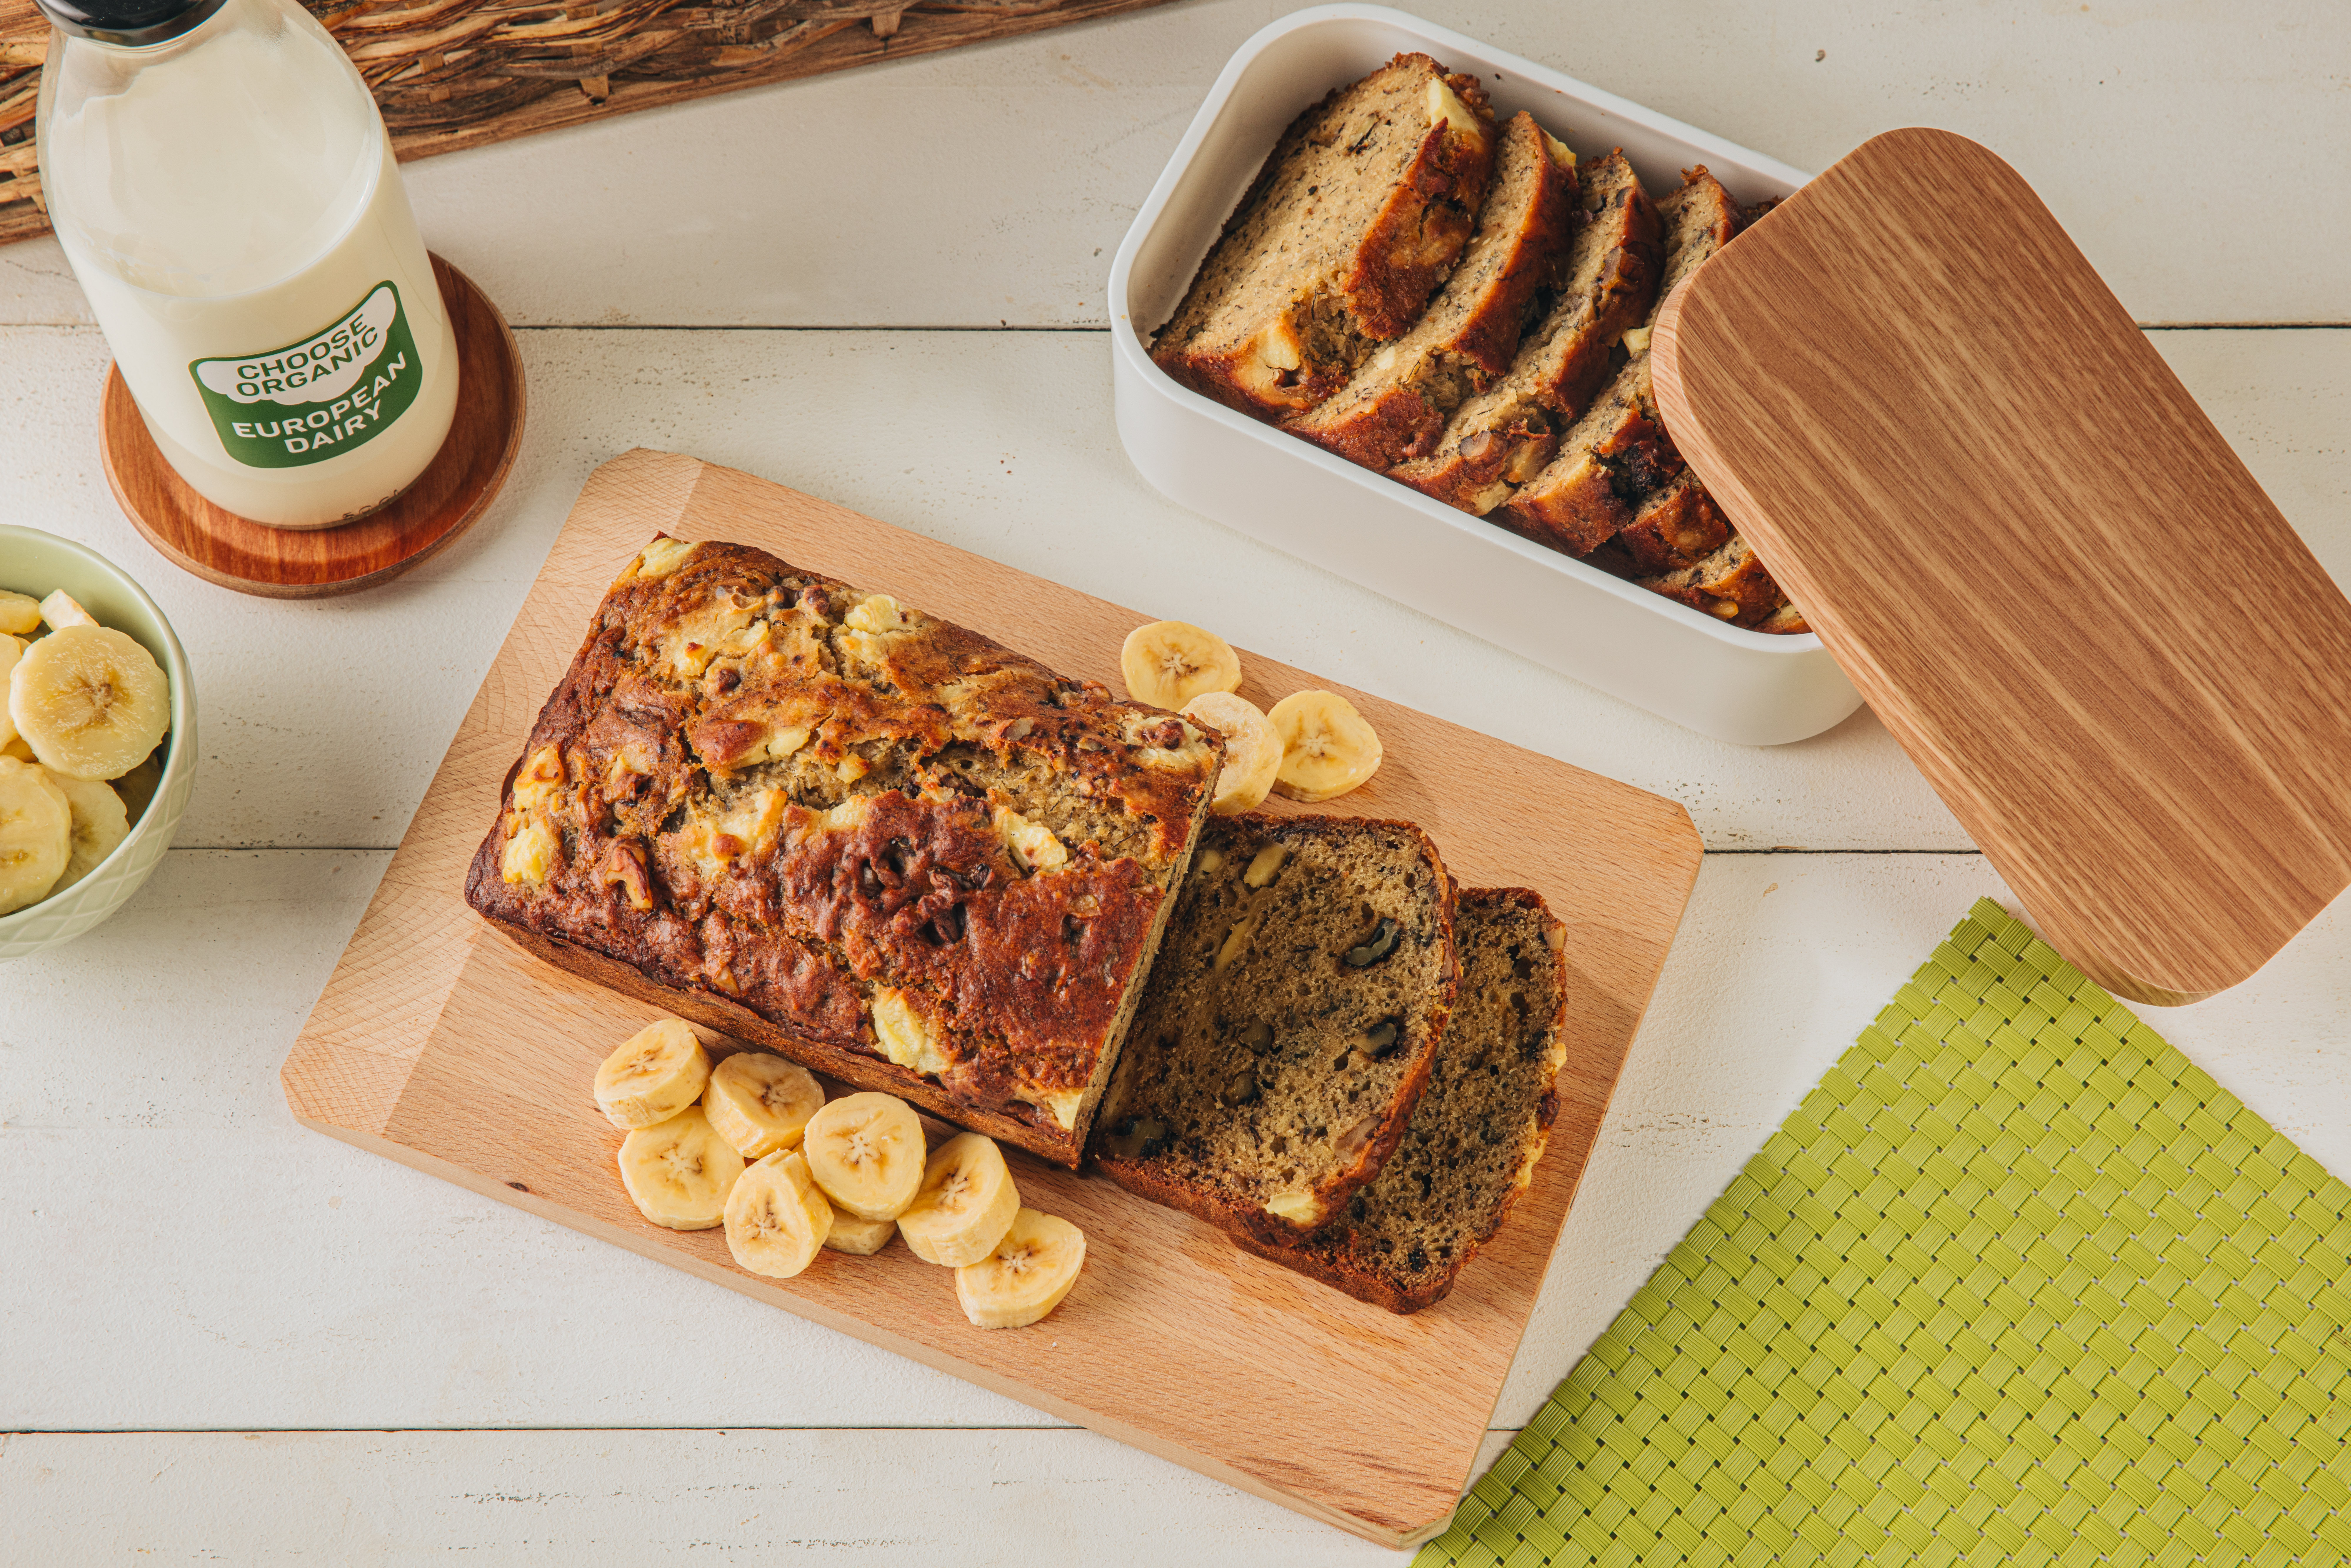 The possibilities with organic European dairy are endless—include it in your next attempt at baking banana bread